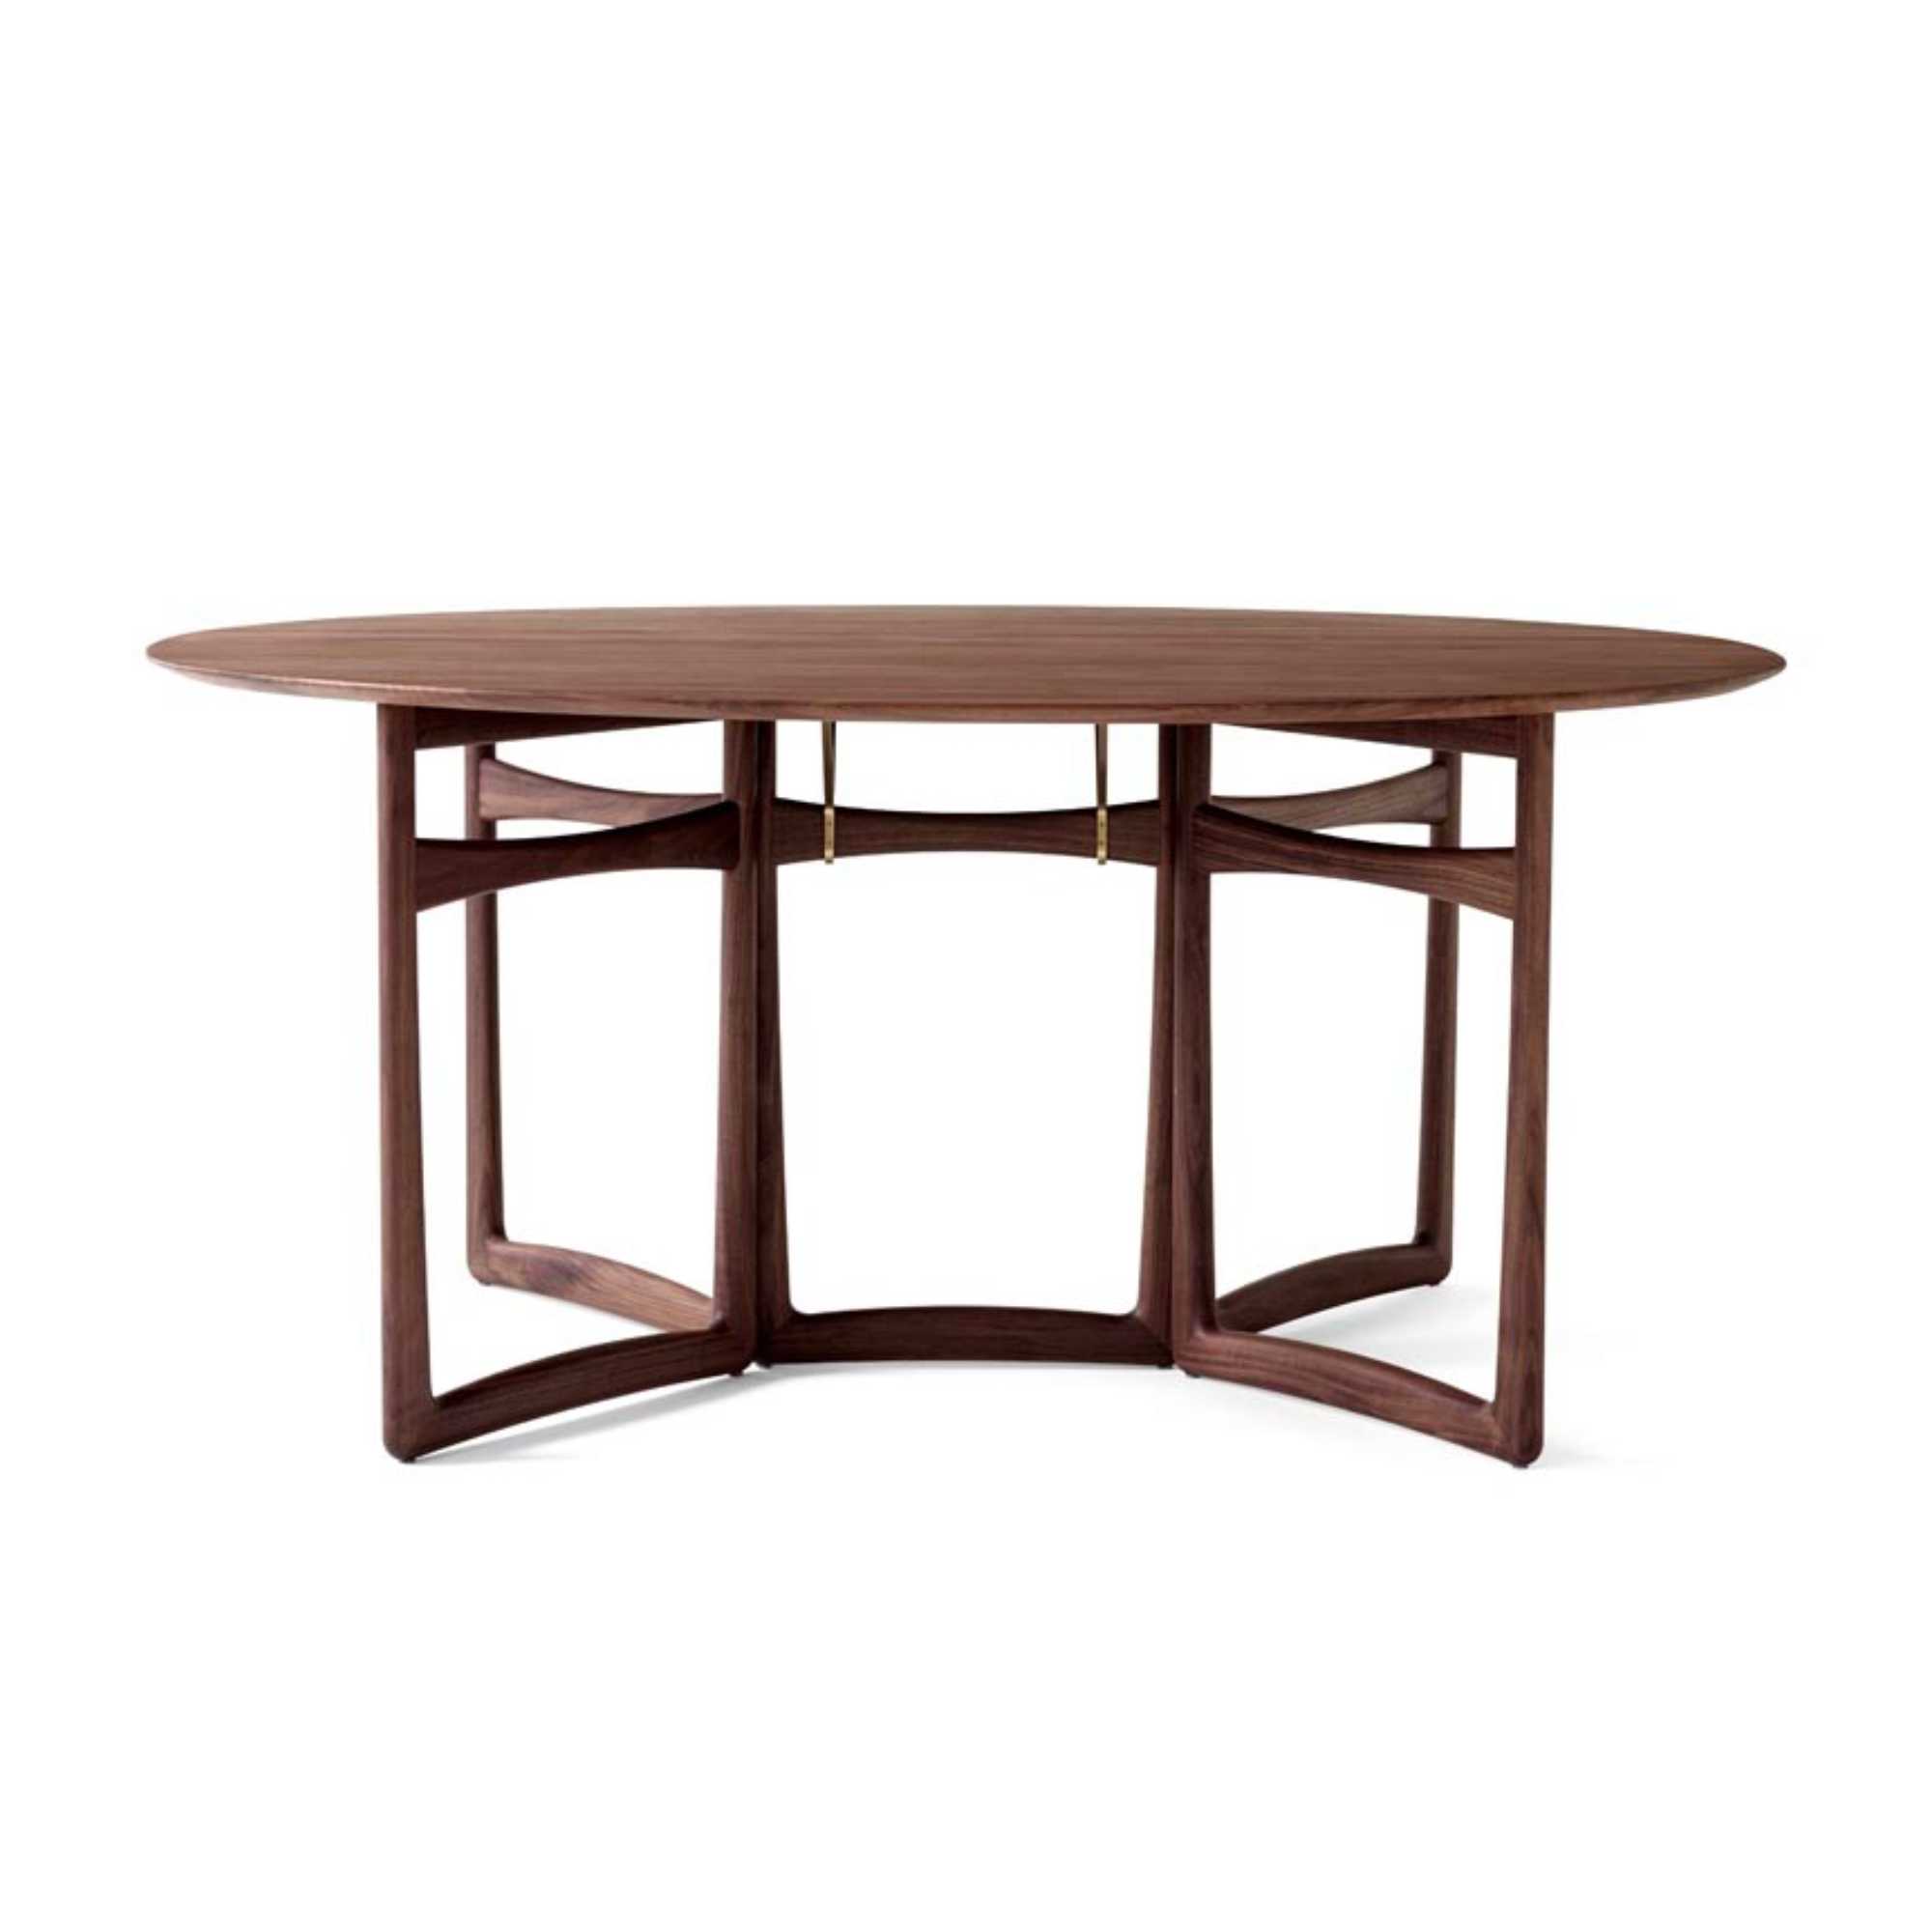 &Tradition HM6 Drop Leaf Dinning Table , Oiled Walnut